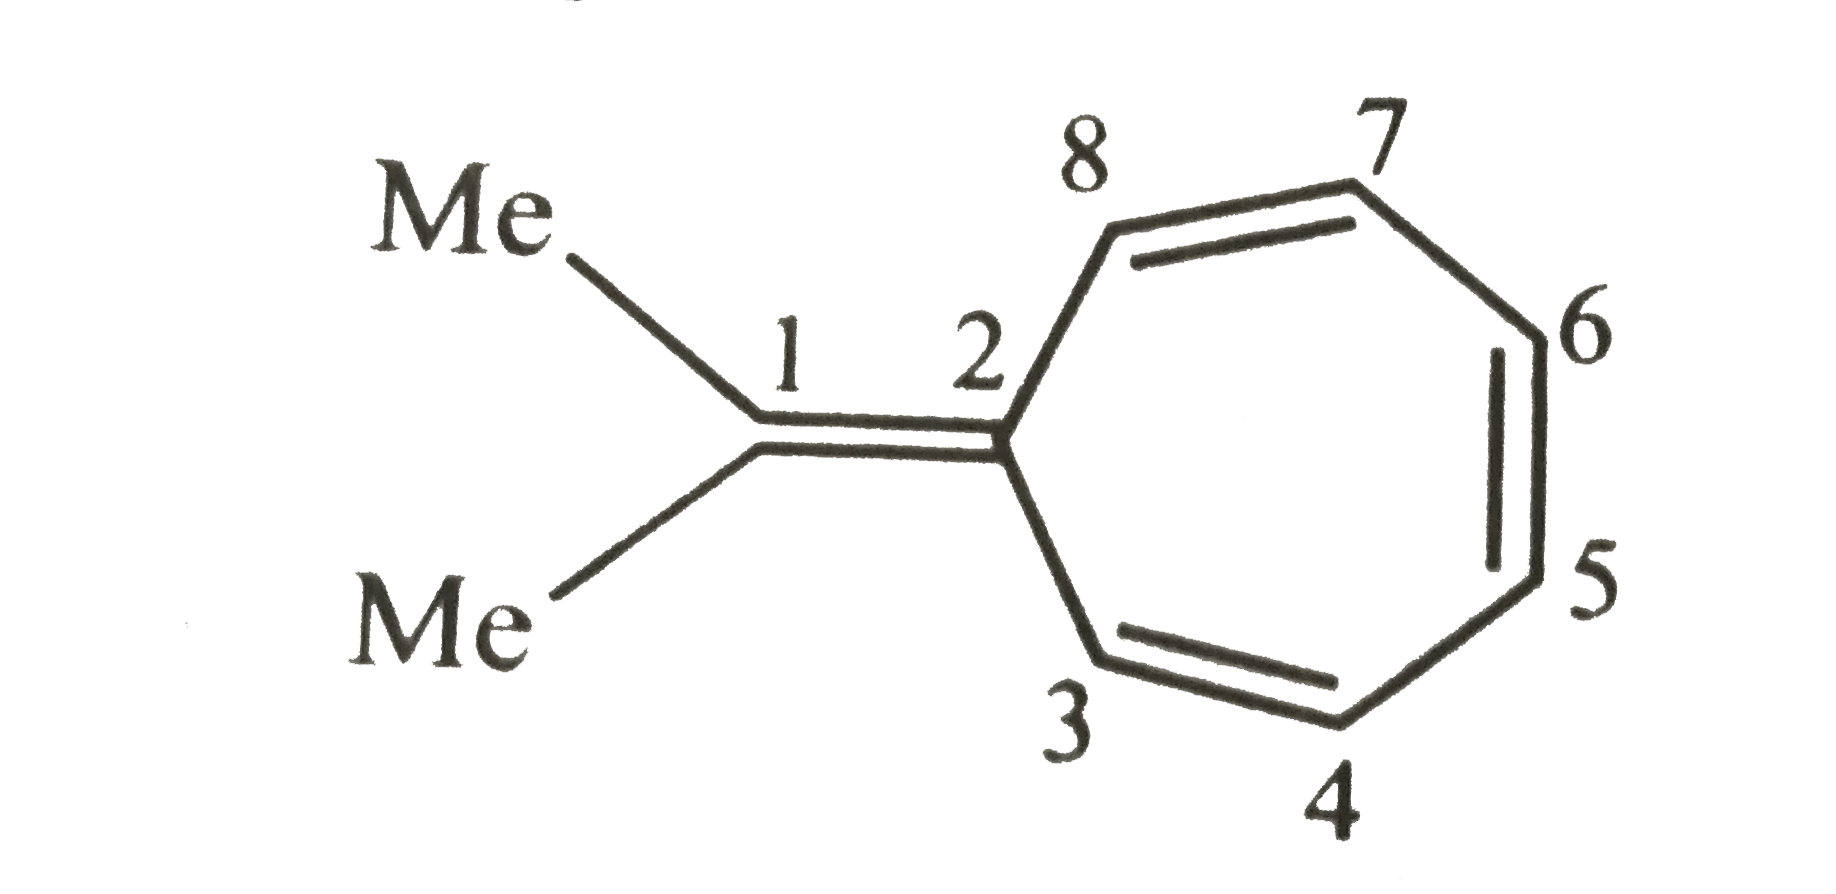 The most likely protonation site in the following molecule is